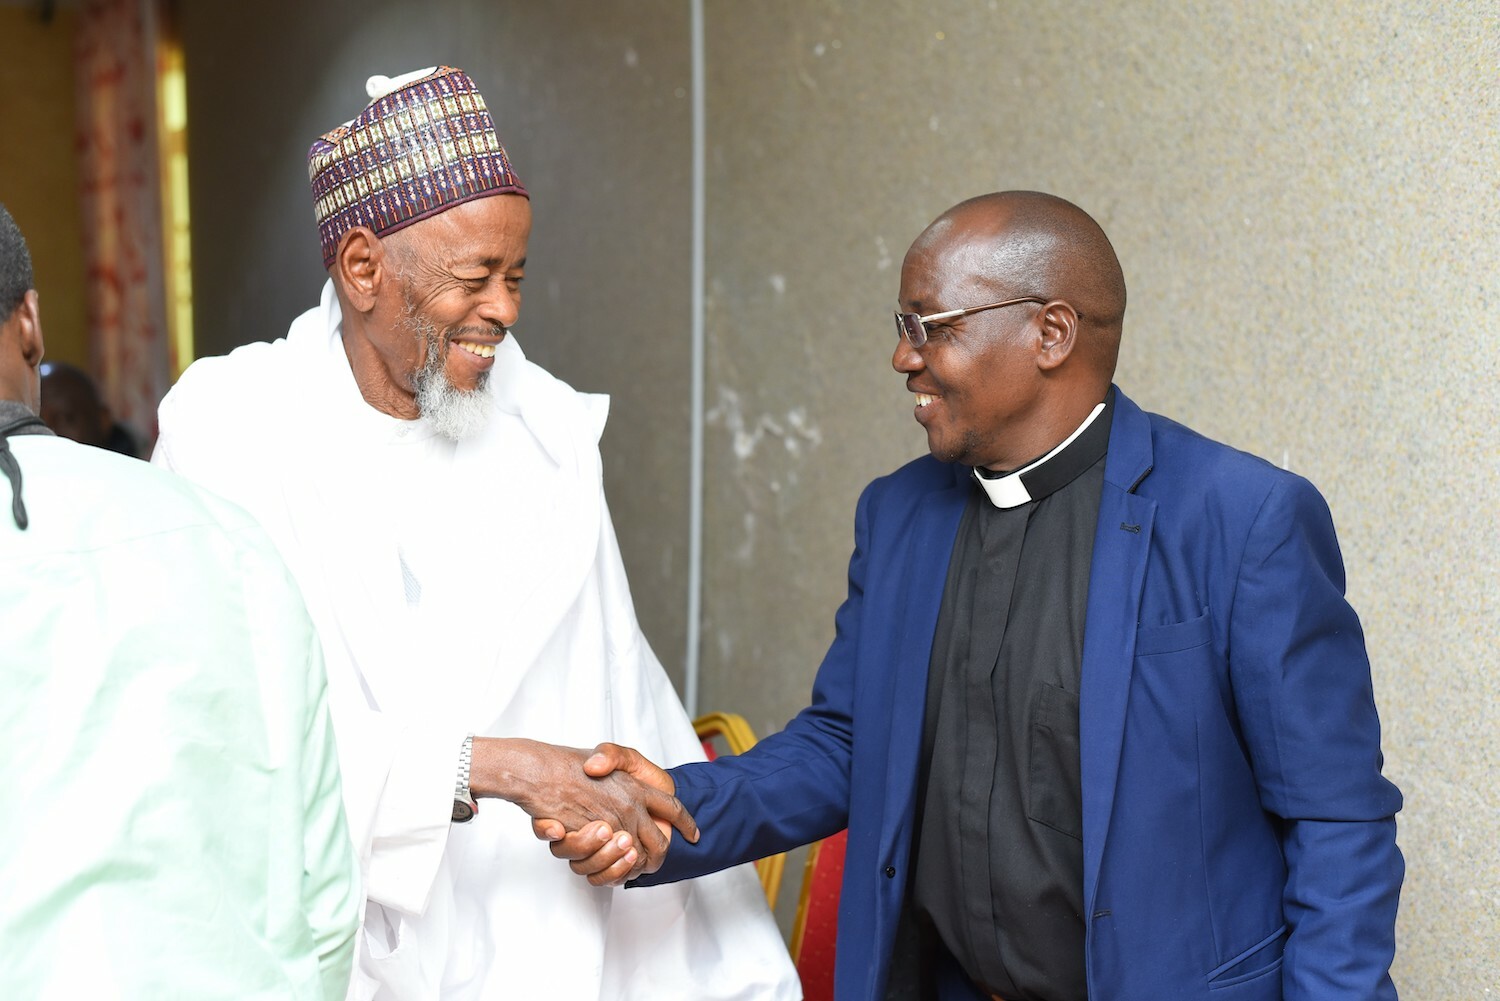 Two men in traditional and religious attire commemorating Interfaith Harmony Week 2024 in Nigeria, shaking hands and exchanging smiles.